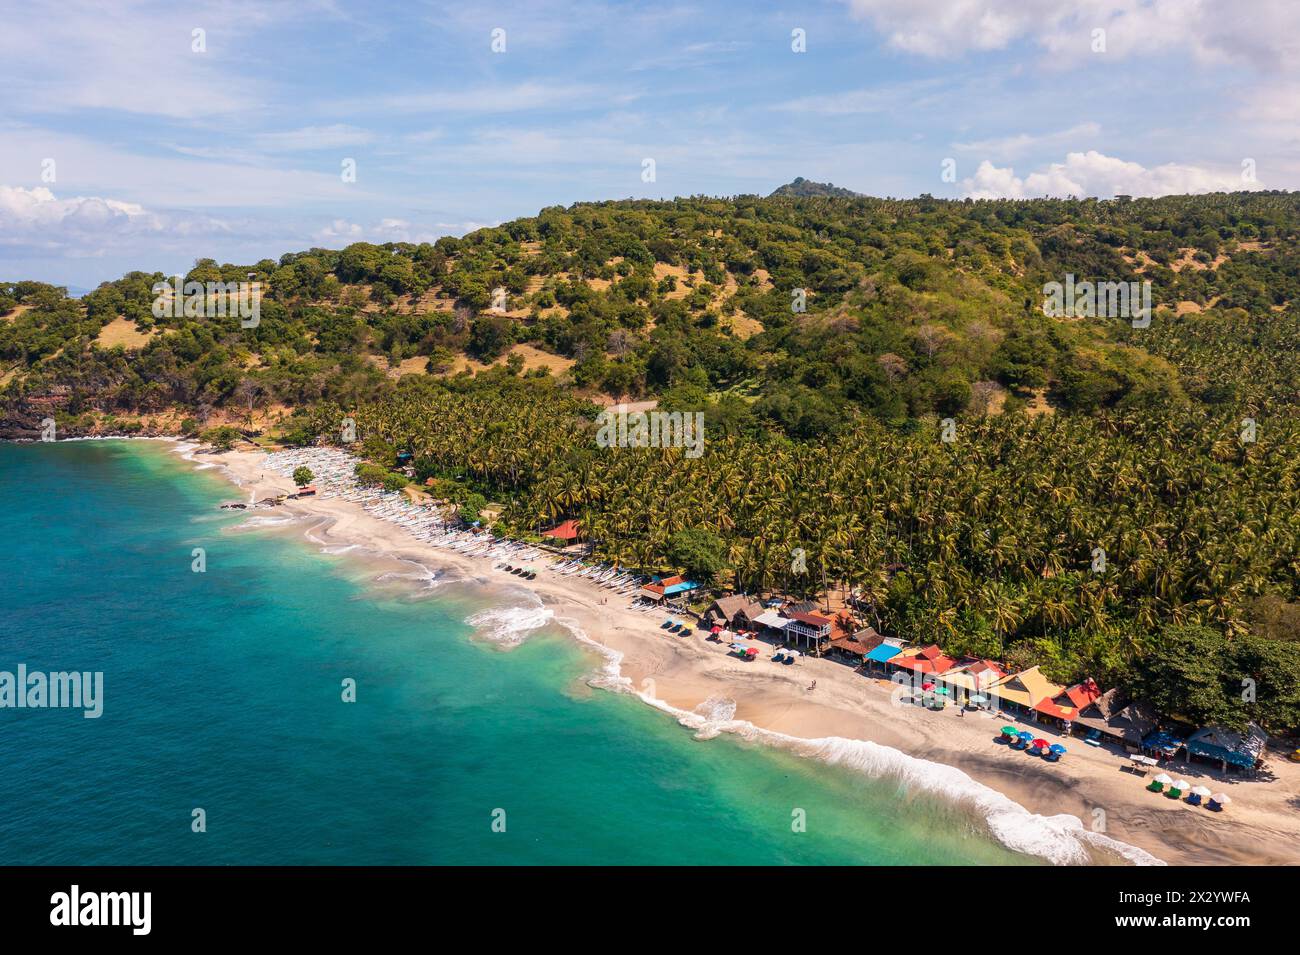 Bali, Indonesia: Aerial landscape of the Virgin beach near Amlapura and Candidasa in eastern Bali with a few drink and food stands. Stock Photo